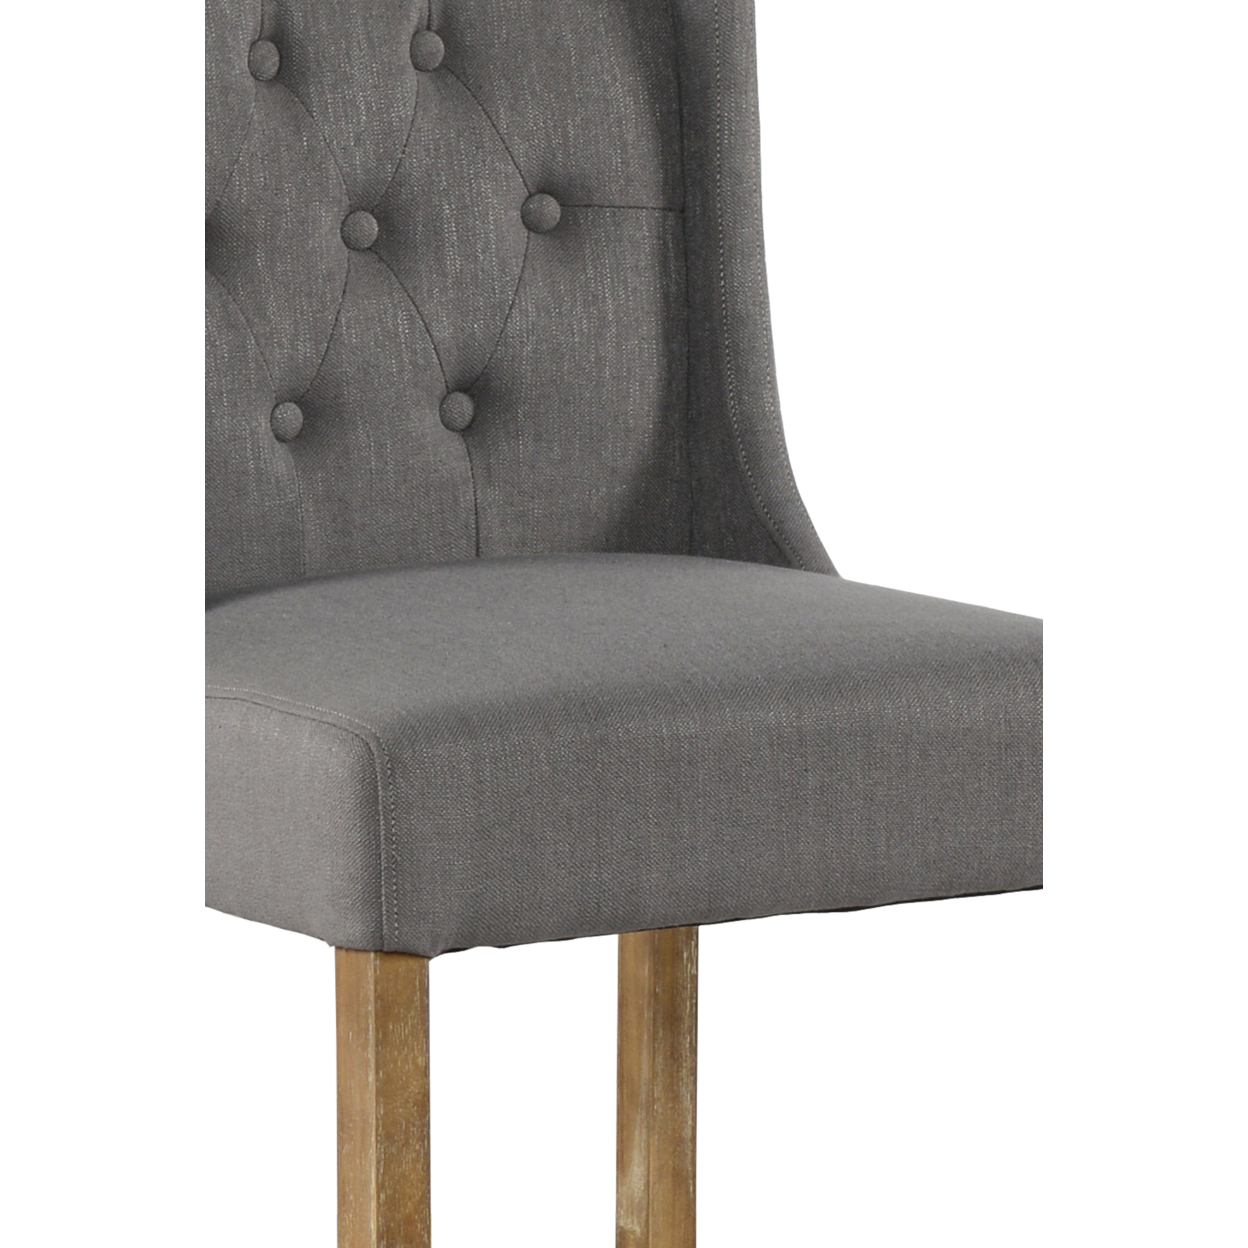 Wooden Barstool With Padded Seat, Button Tufted, Wing Back, Set Of 2, Gray And Brown- Saltoro Sherpi